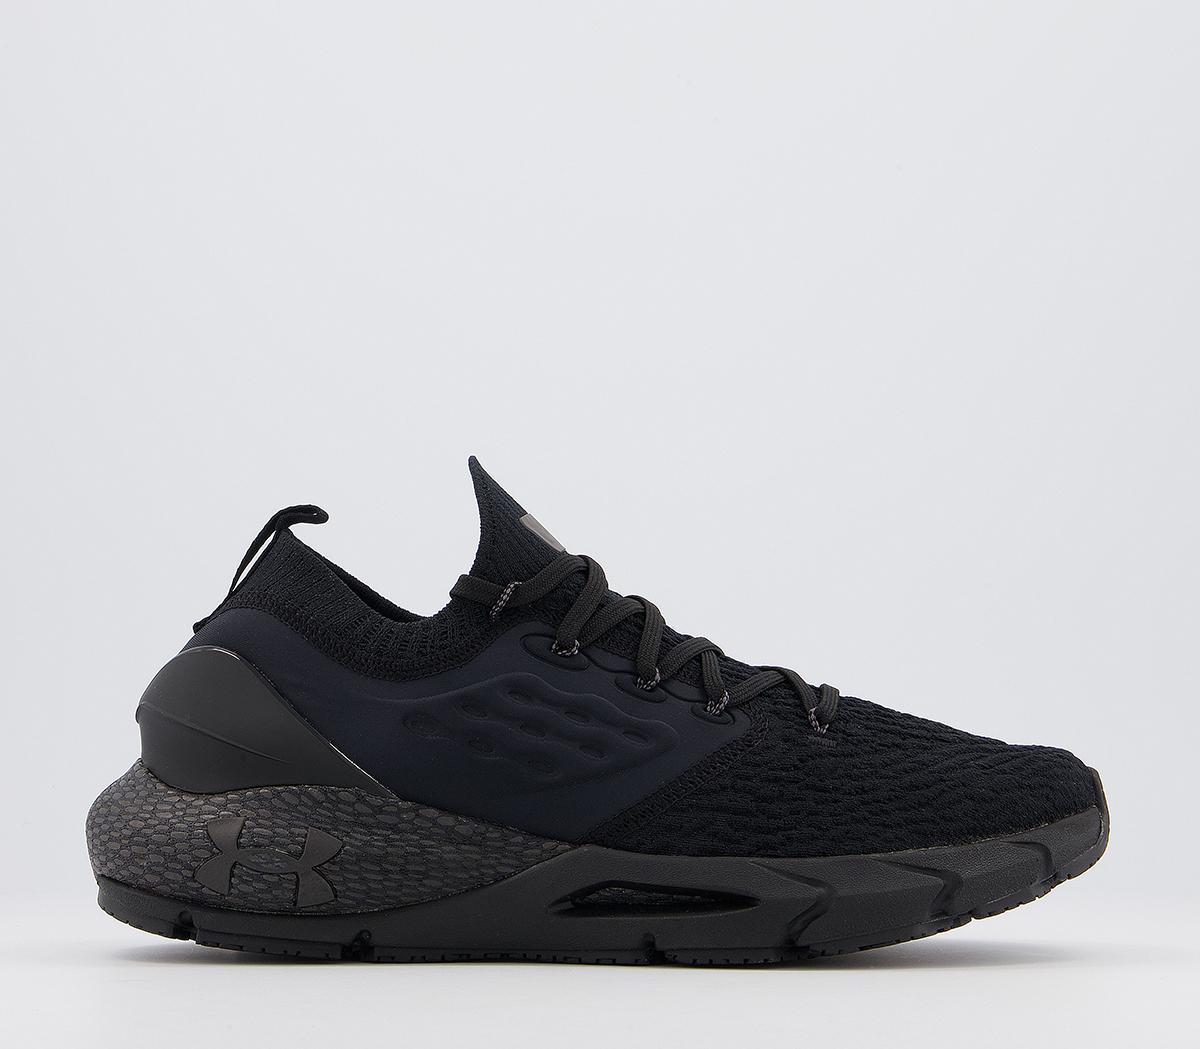 Under Armour Hovr Phantom 2 Trainers Black - His trainers